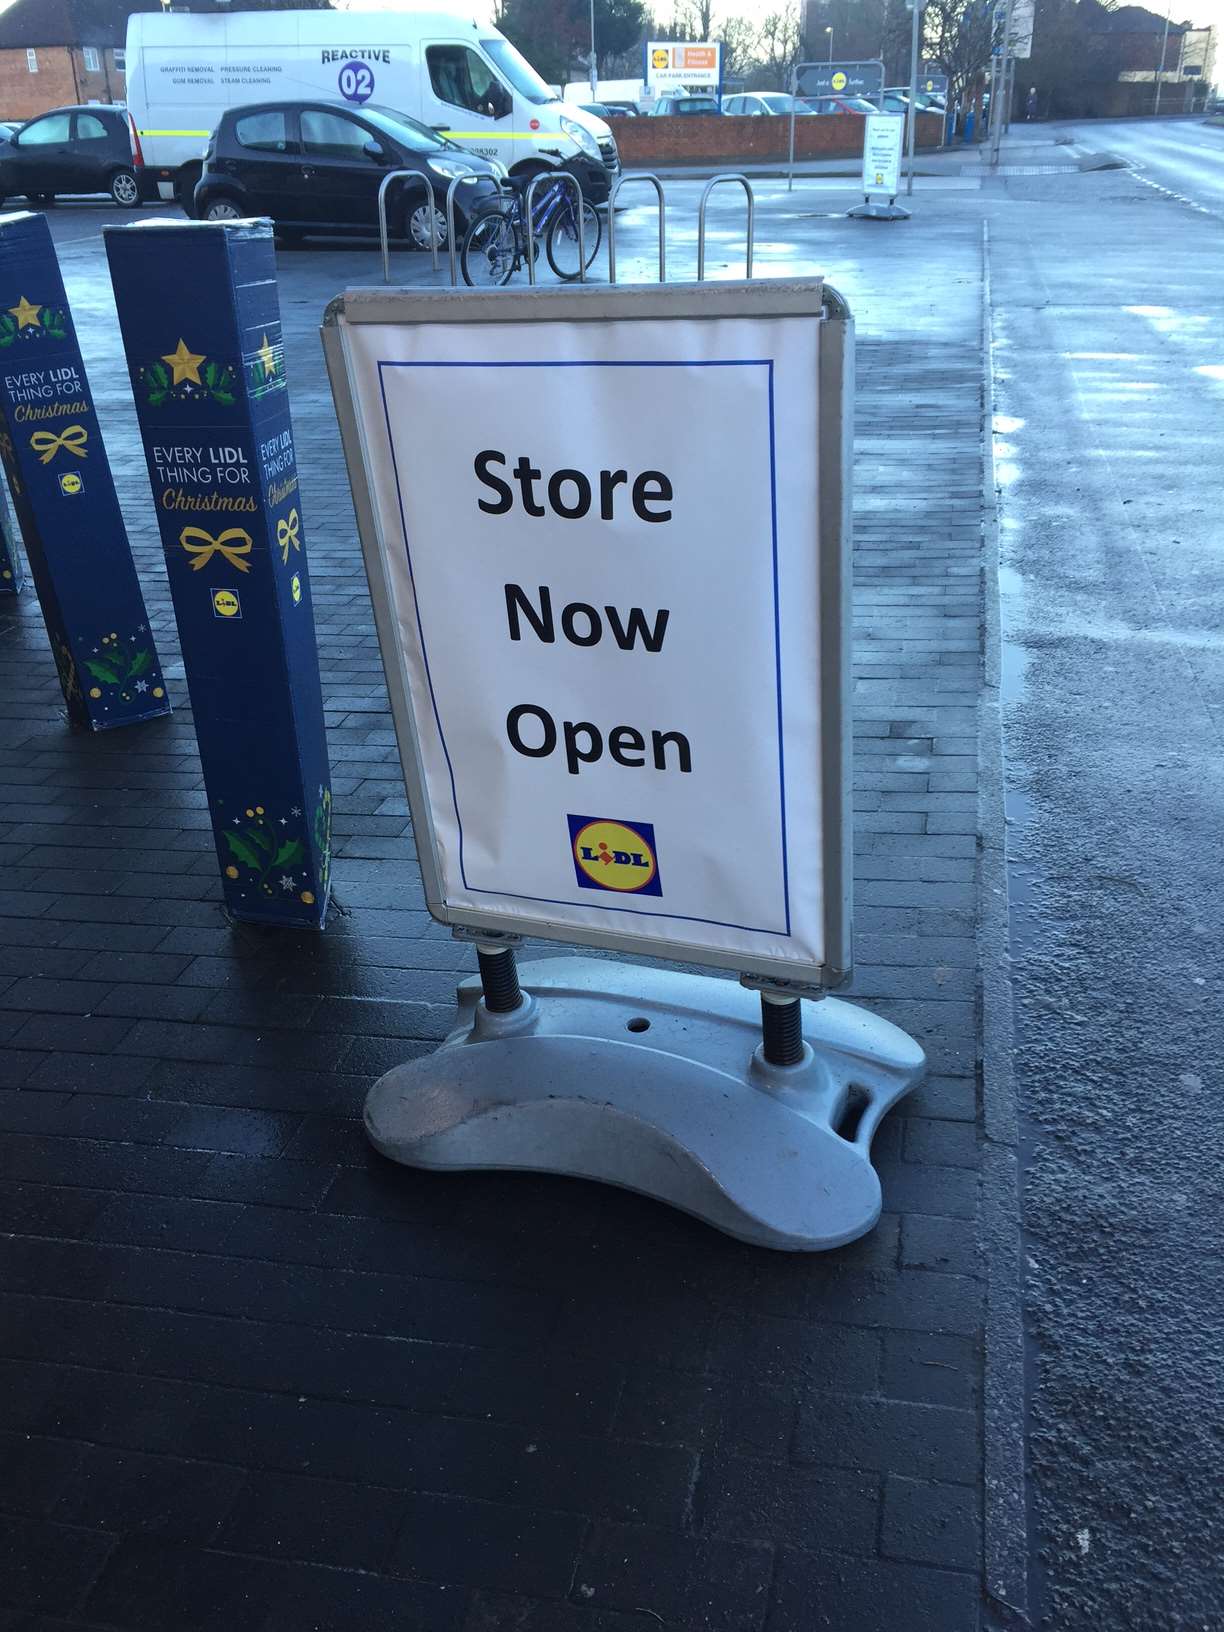 The store on New Street is now open